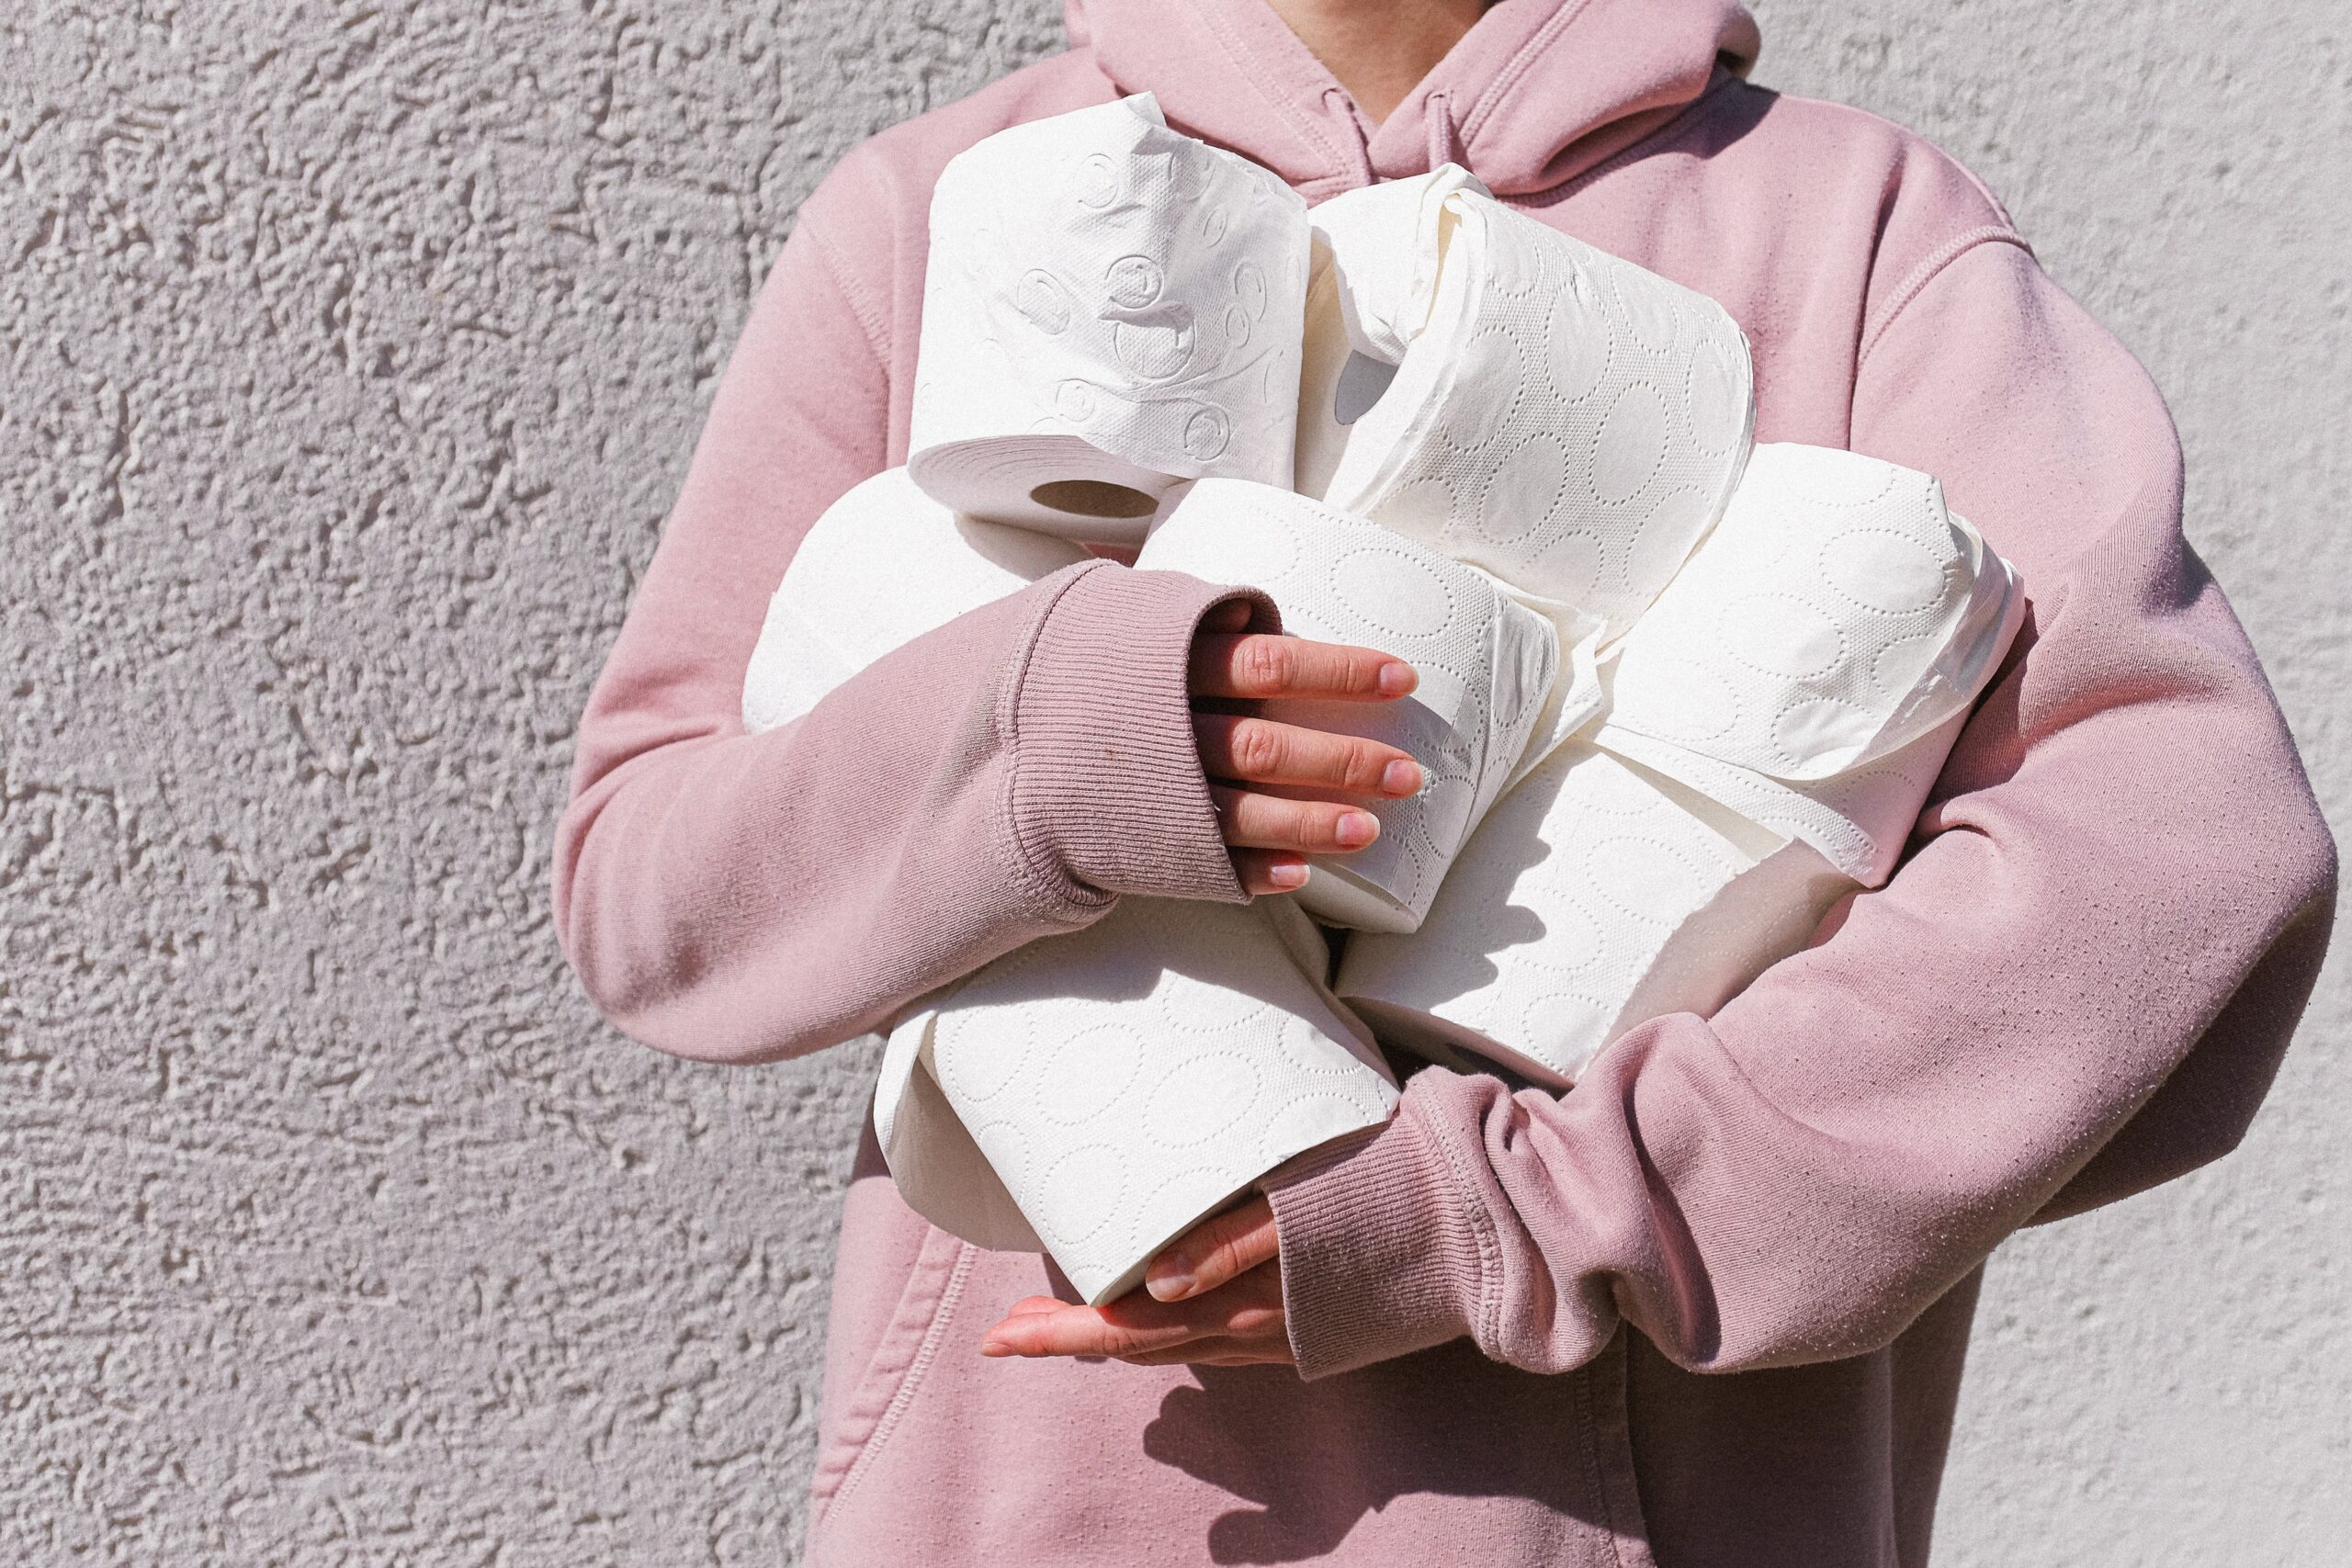 person in pink hoodie holding armful of toilet paper